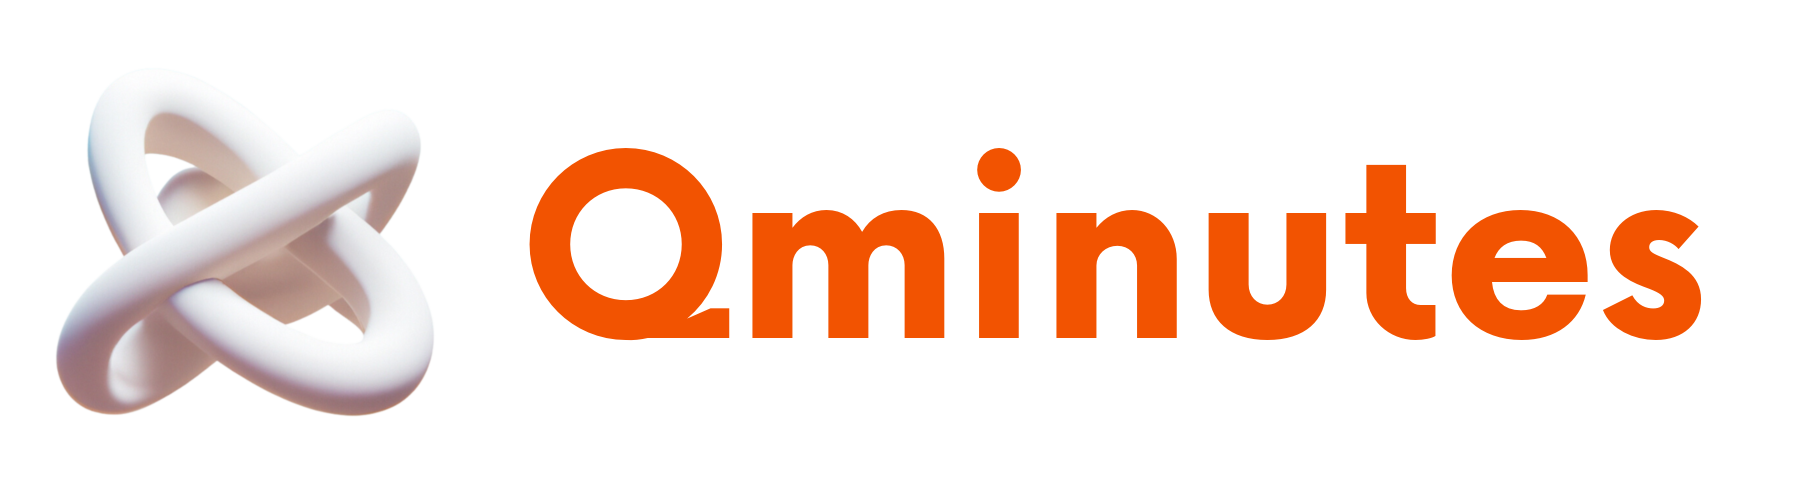 Qminutes - Better Productivity at meeting, in minutes.